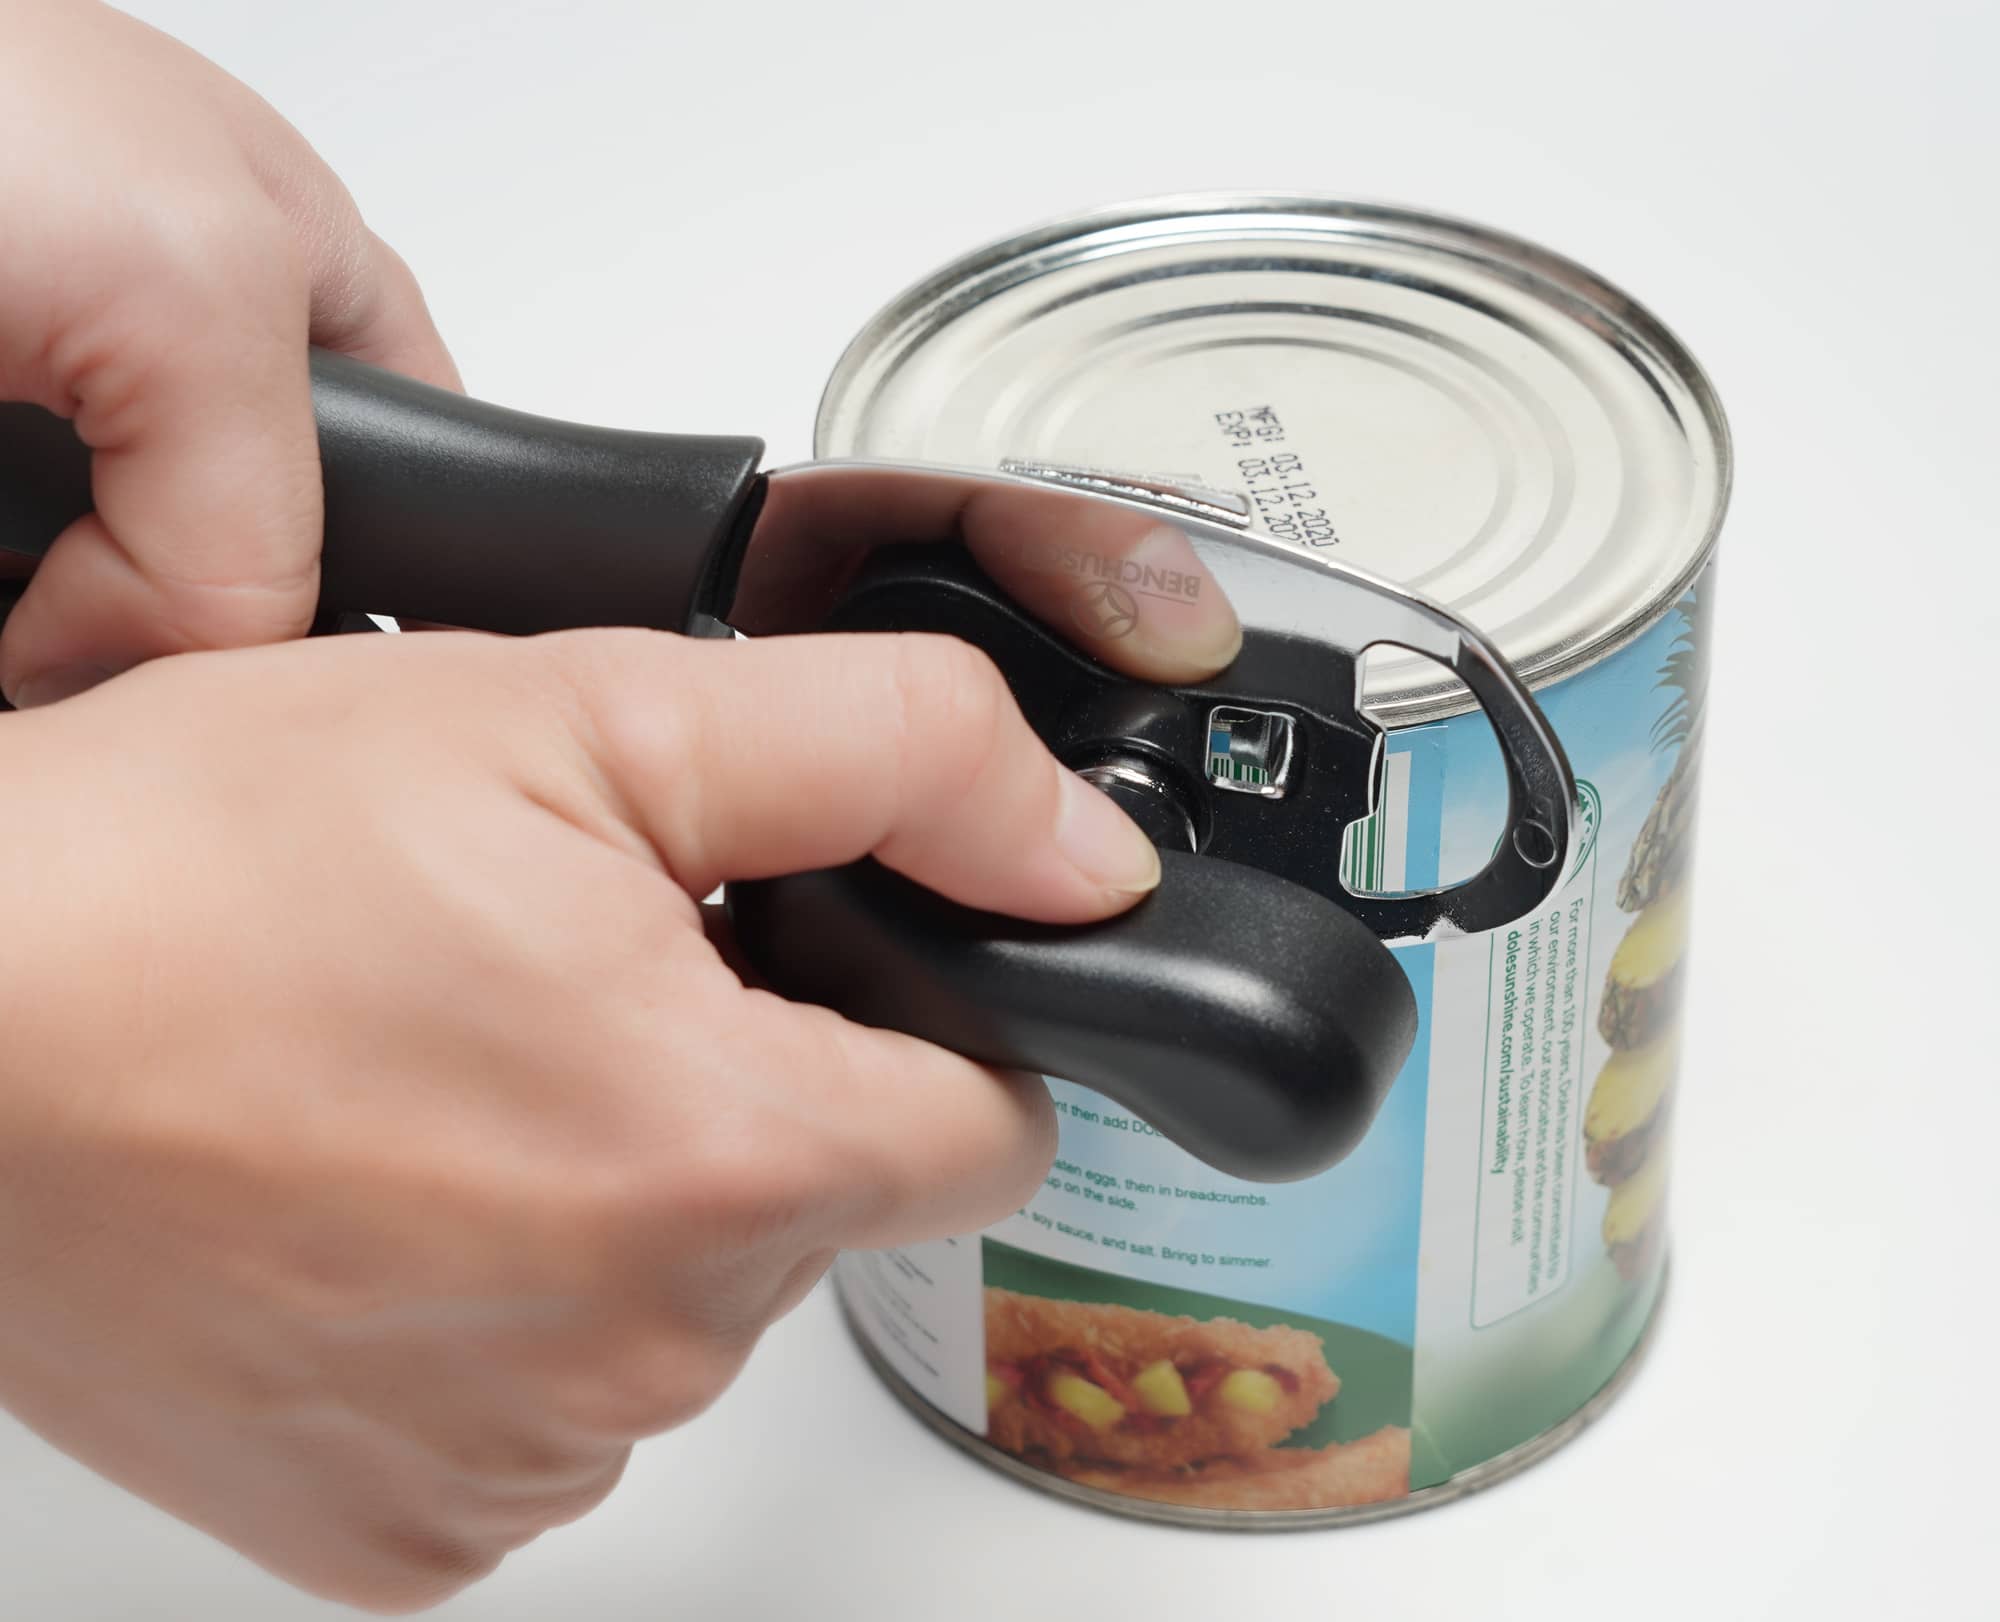 Turning the knob to open the can with Benchusch Mordena Can Opener with Easy Turn Knob